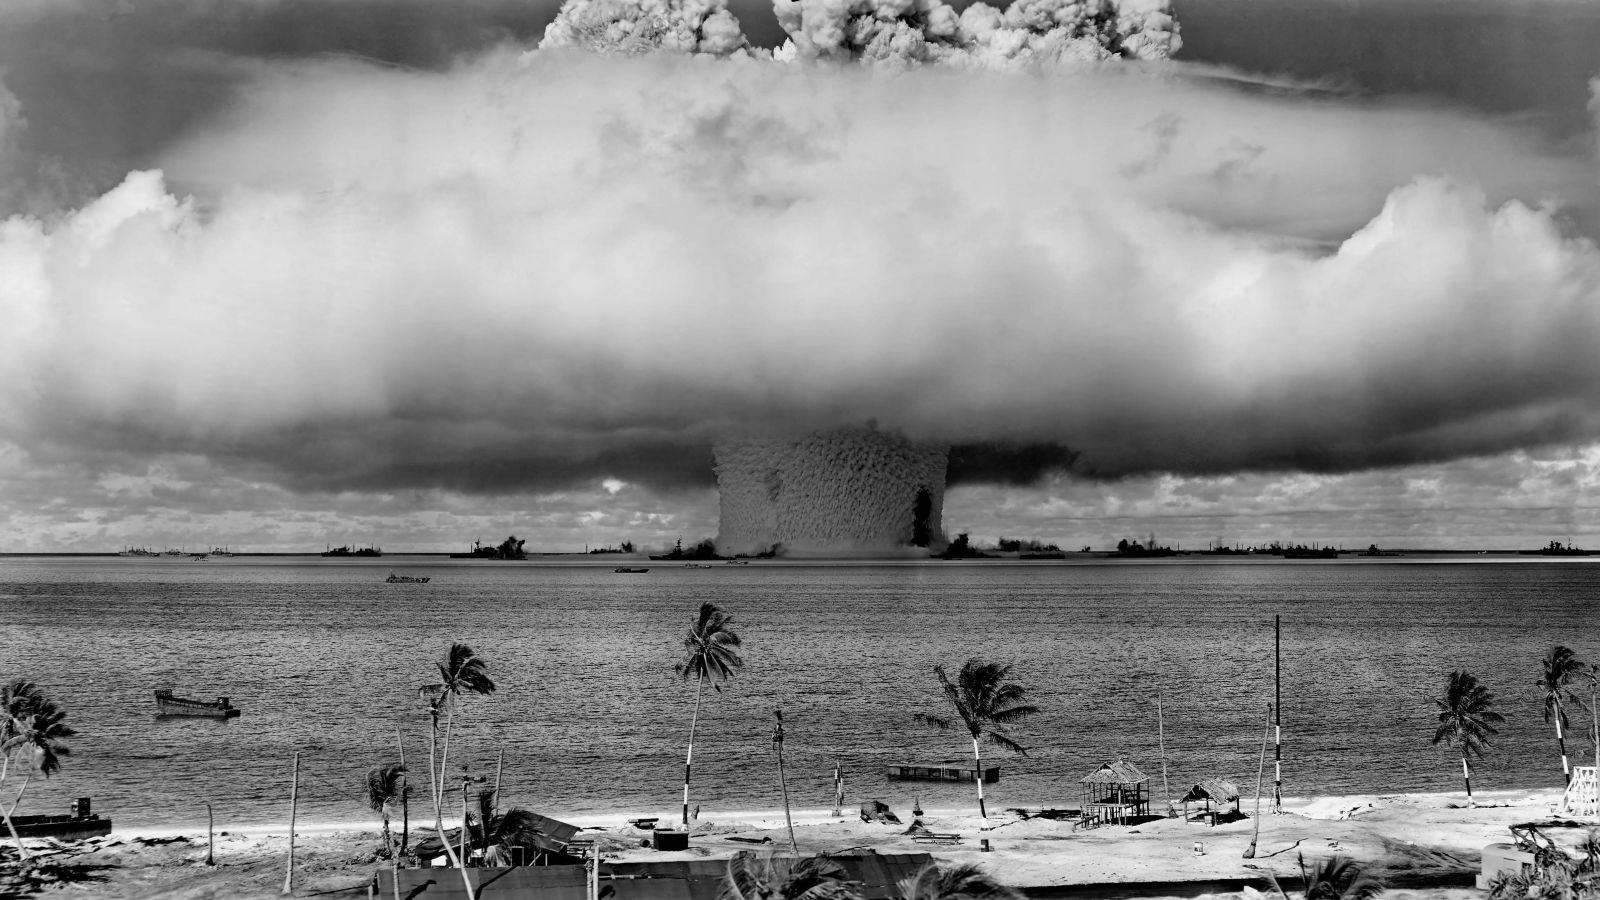 Can You Get an ‘A’ In This Middle School U.S. History Test? bomb on Hiroshima